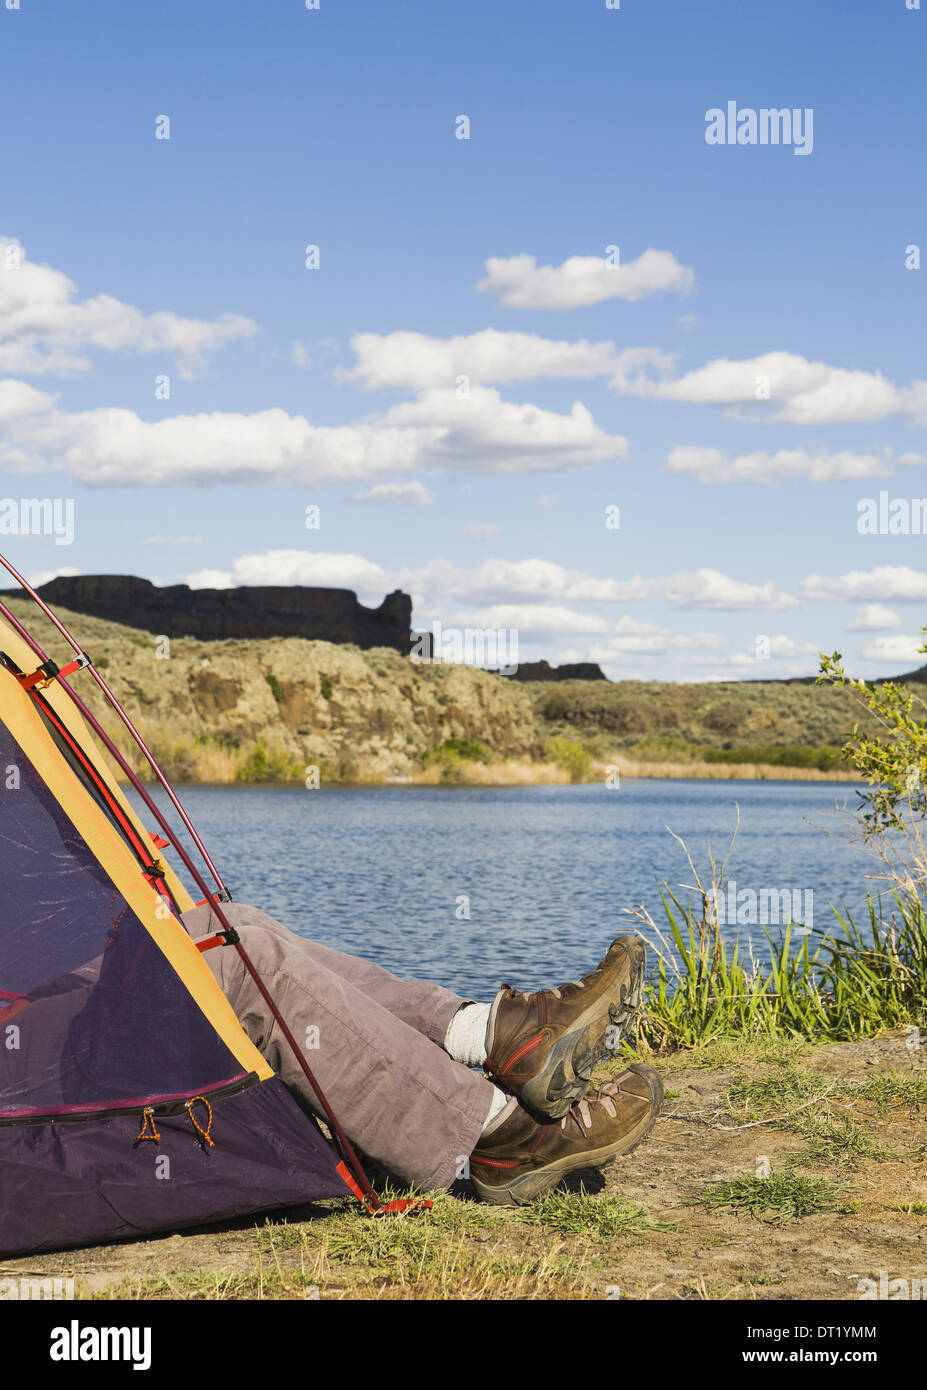 A small tent pitched by the shores of the Sun Lakes in Sun Lakes State Park A man's feet in loafers sticking out Stock Photo